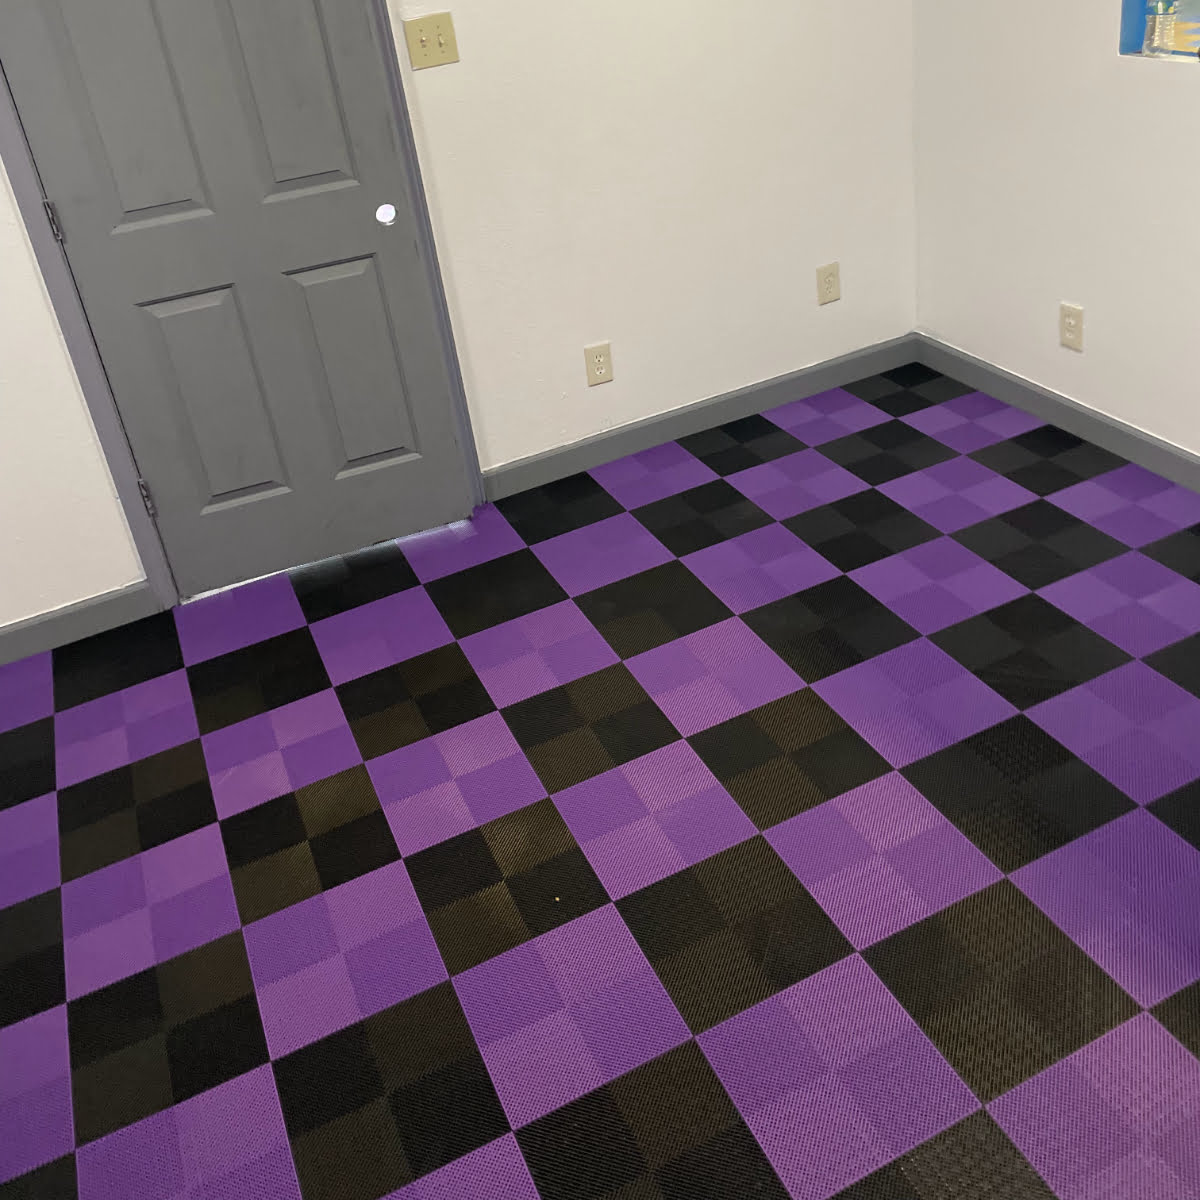 Garage workshop room using our Perforated black and purple tiles.